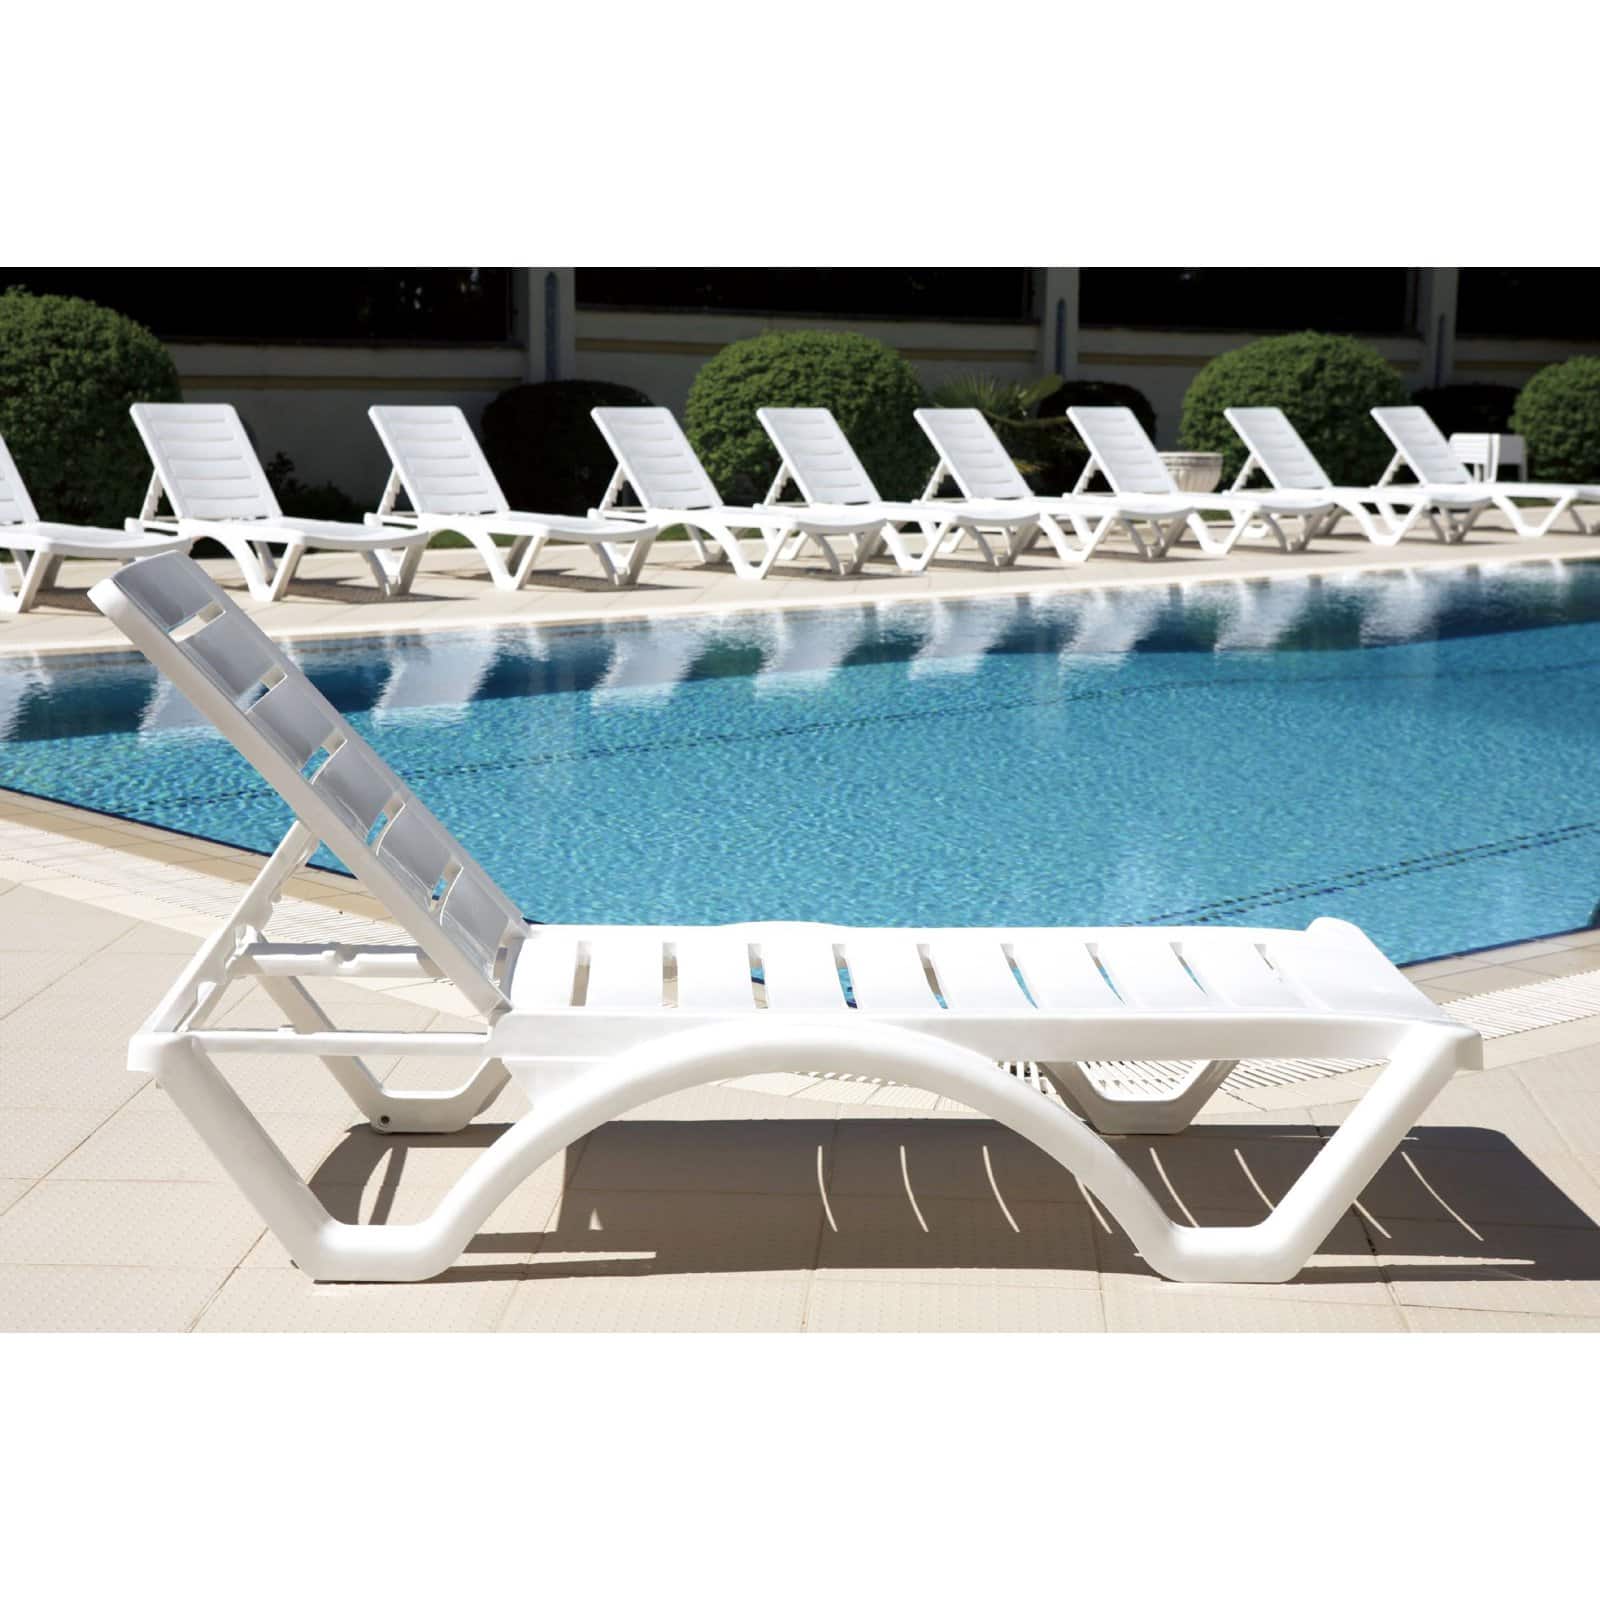 Compamia Aqua Modern Resin Pool Chaise Lounge in White Finish - image 3 of 9